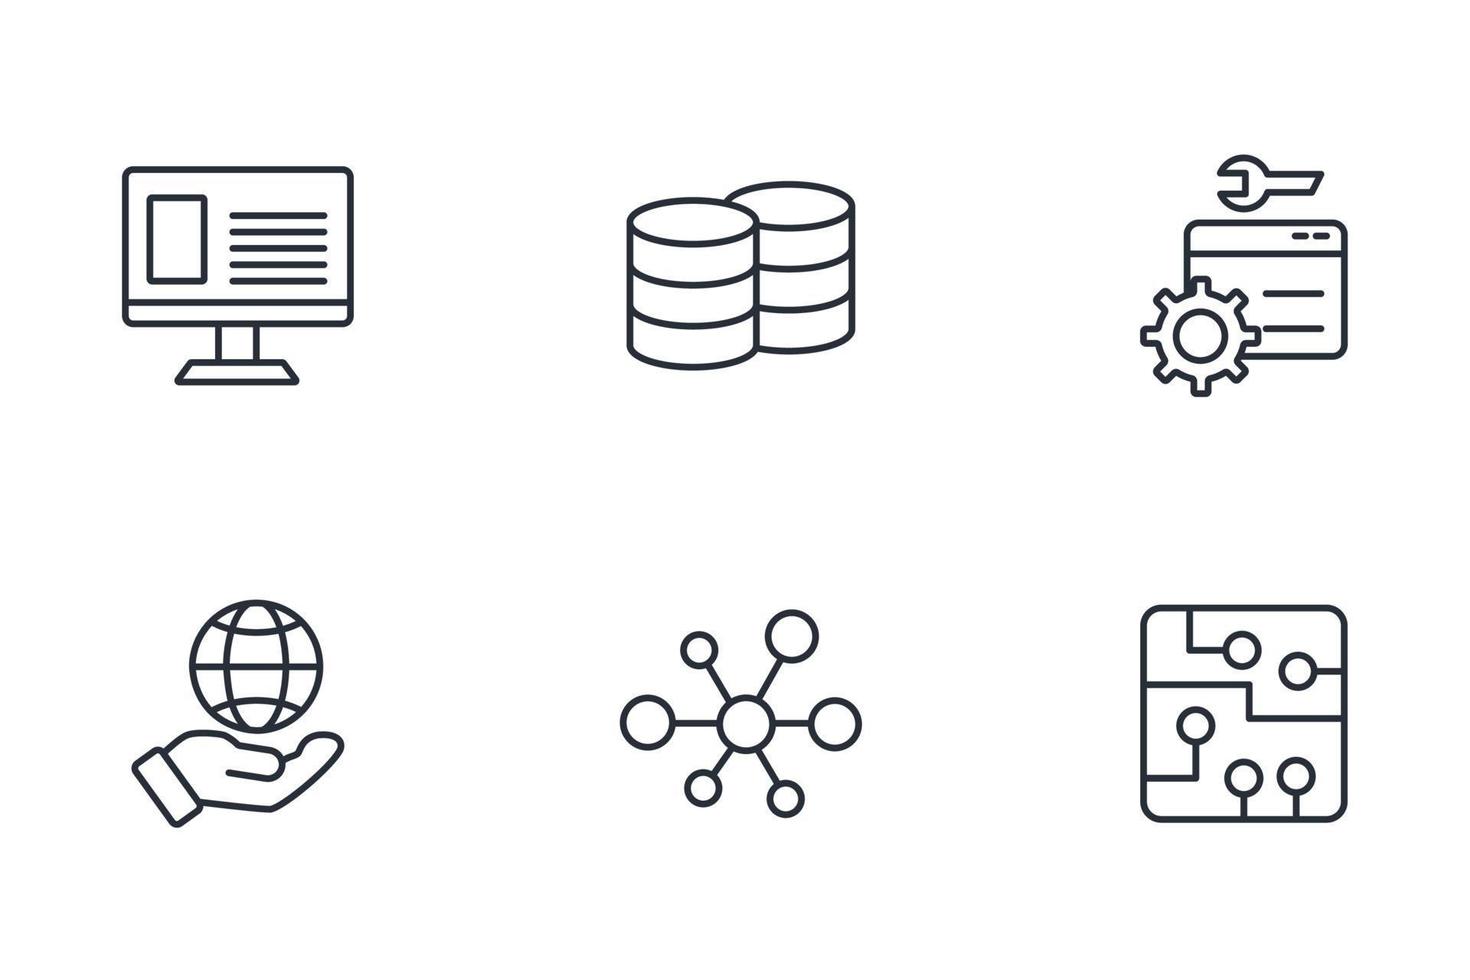 information technology icons set . information technology pack symbol vector elements for infographic web